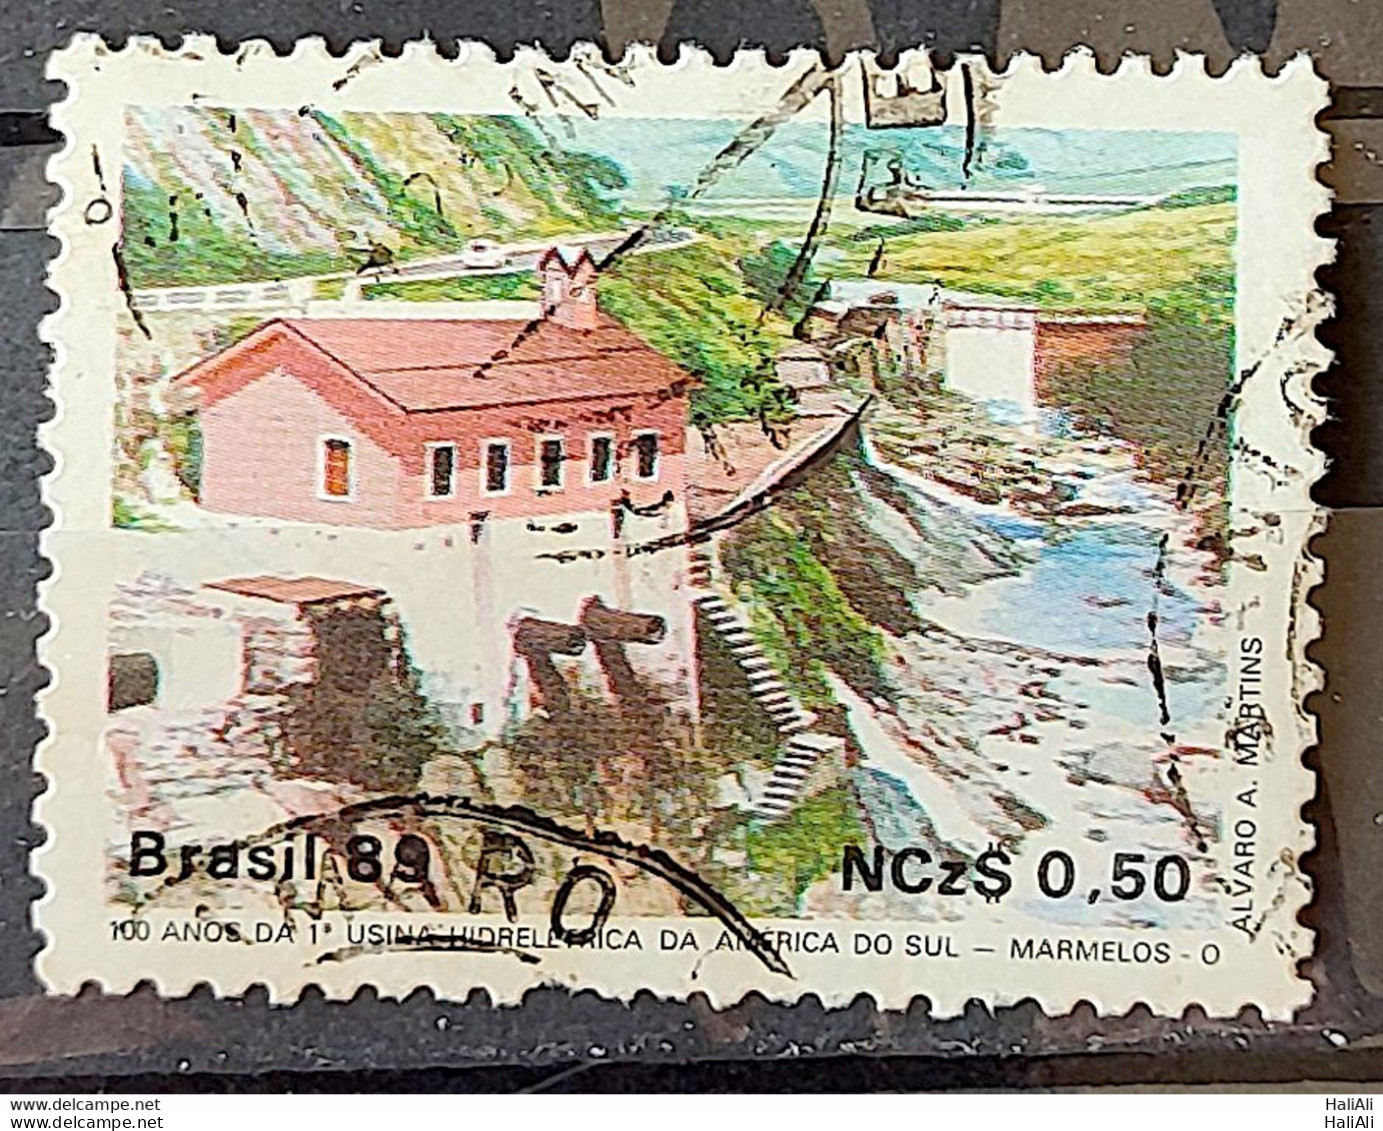 C 1644 Brazil Stamp 100 Years Hydroelectric Marmelos Energy Electricity Juiz De Fora 1989 Circulated 31 - Gebraucht